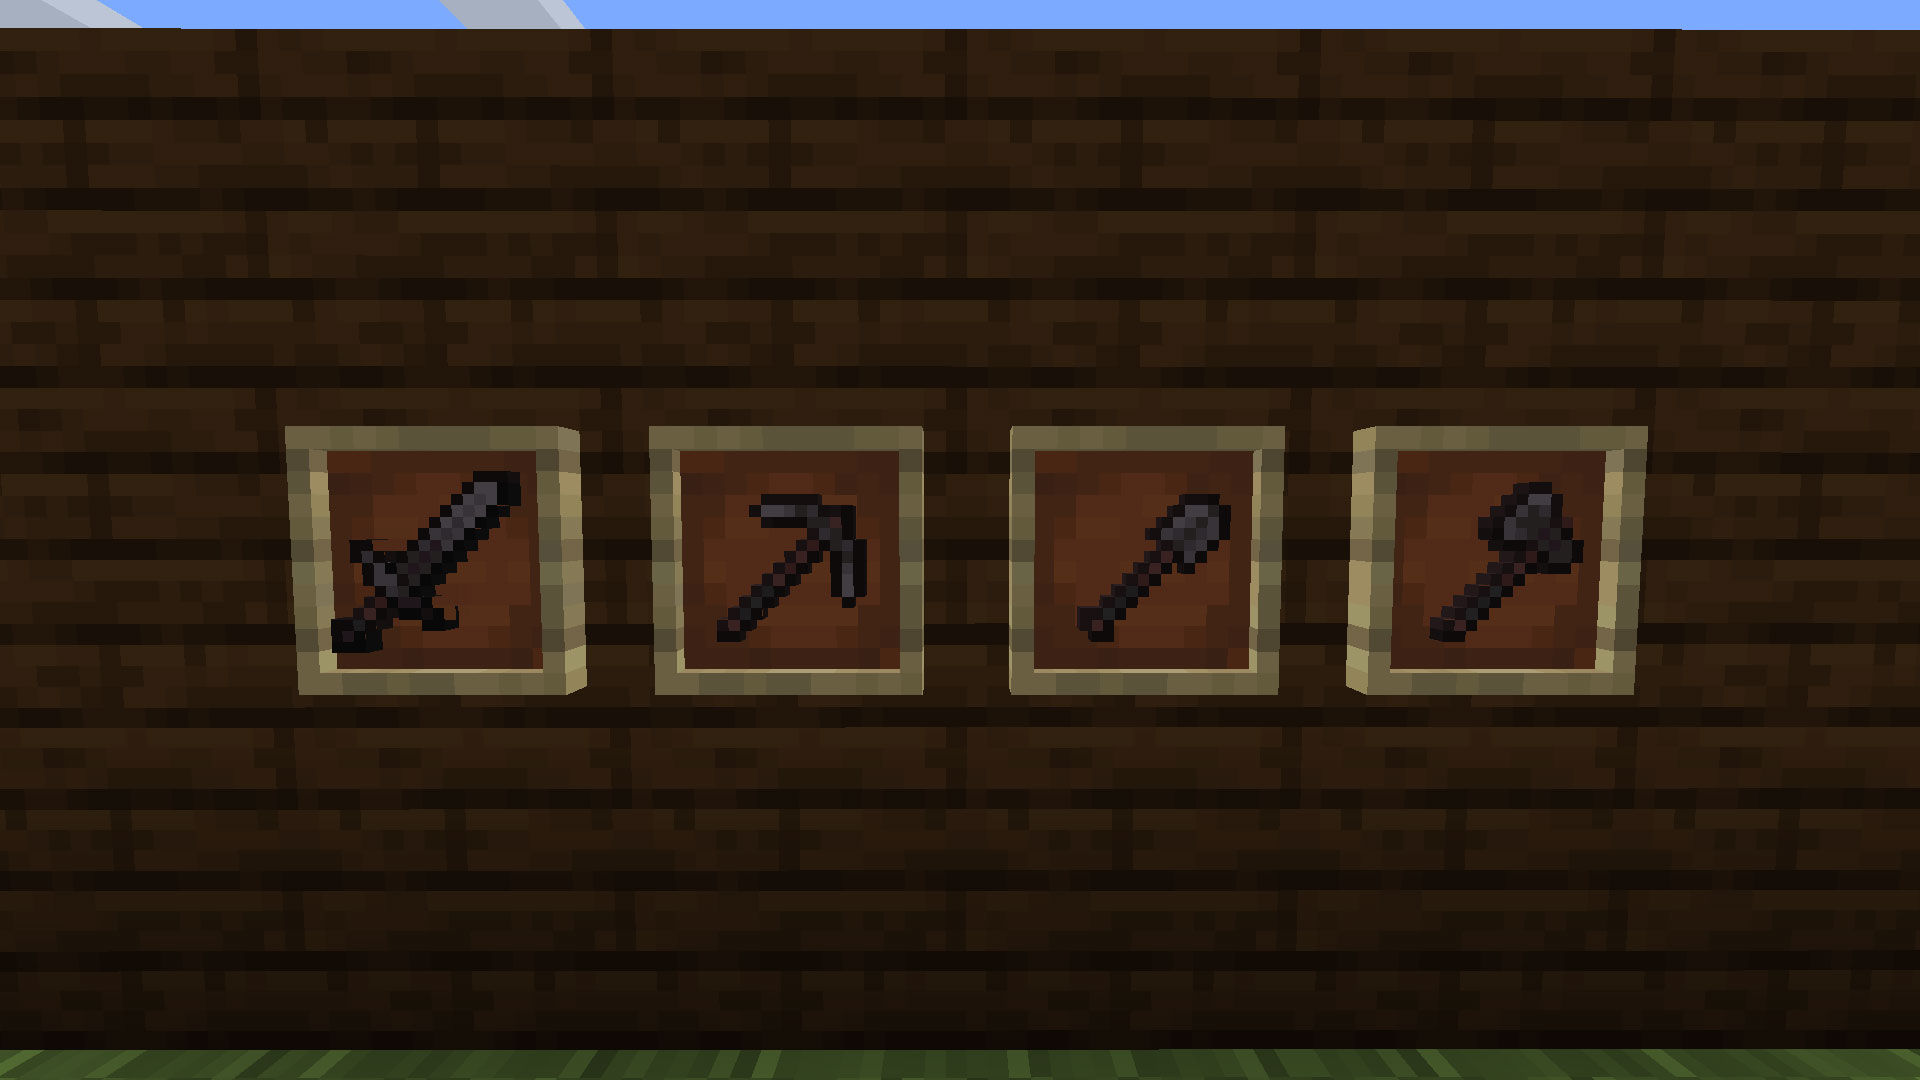 How To Make Netherite Tools In Minecraft Bedrock